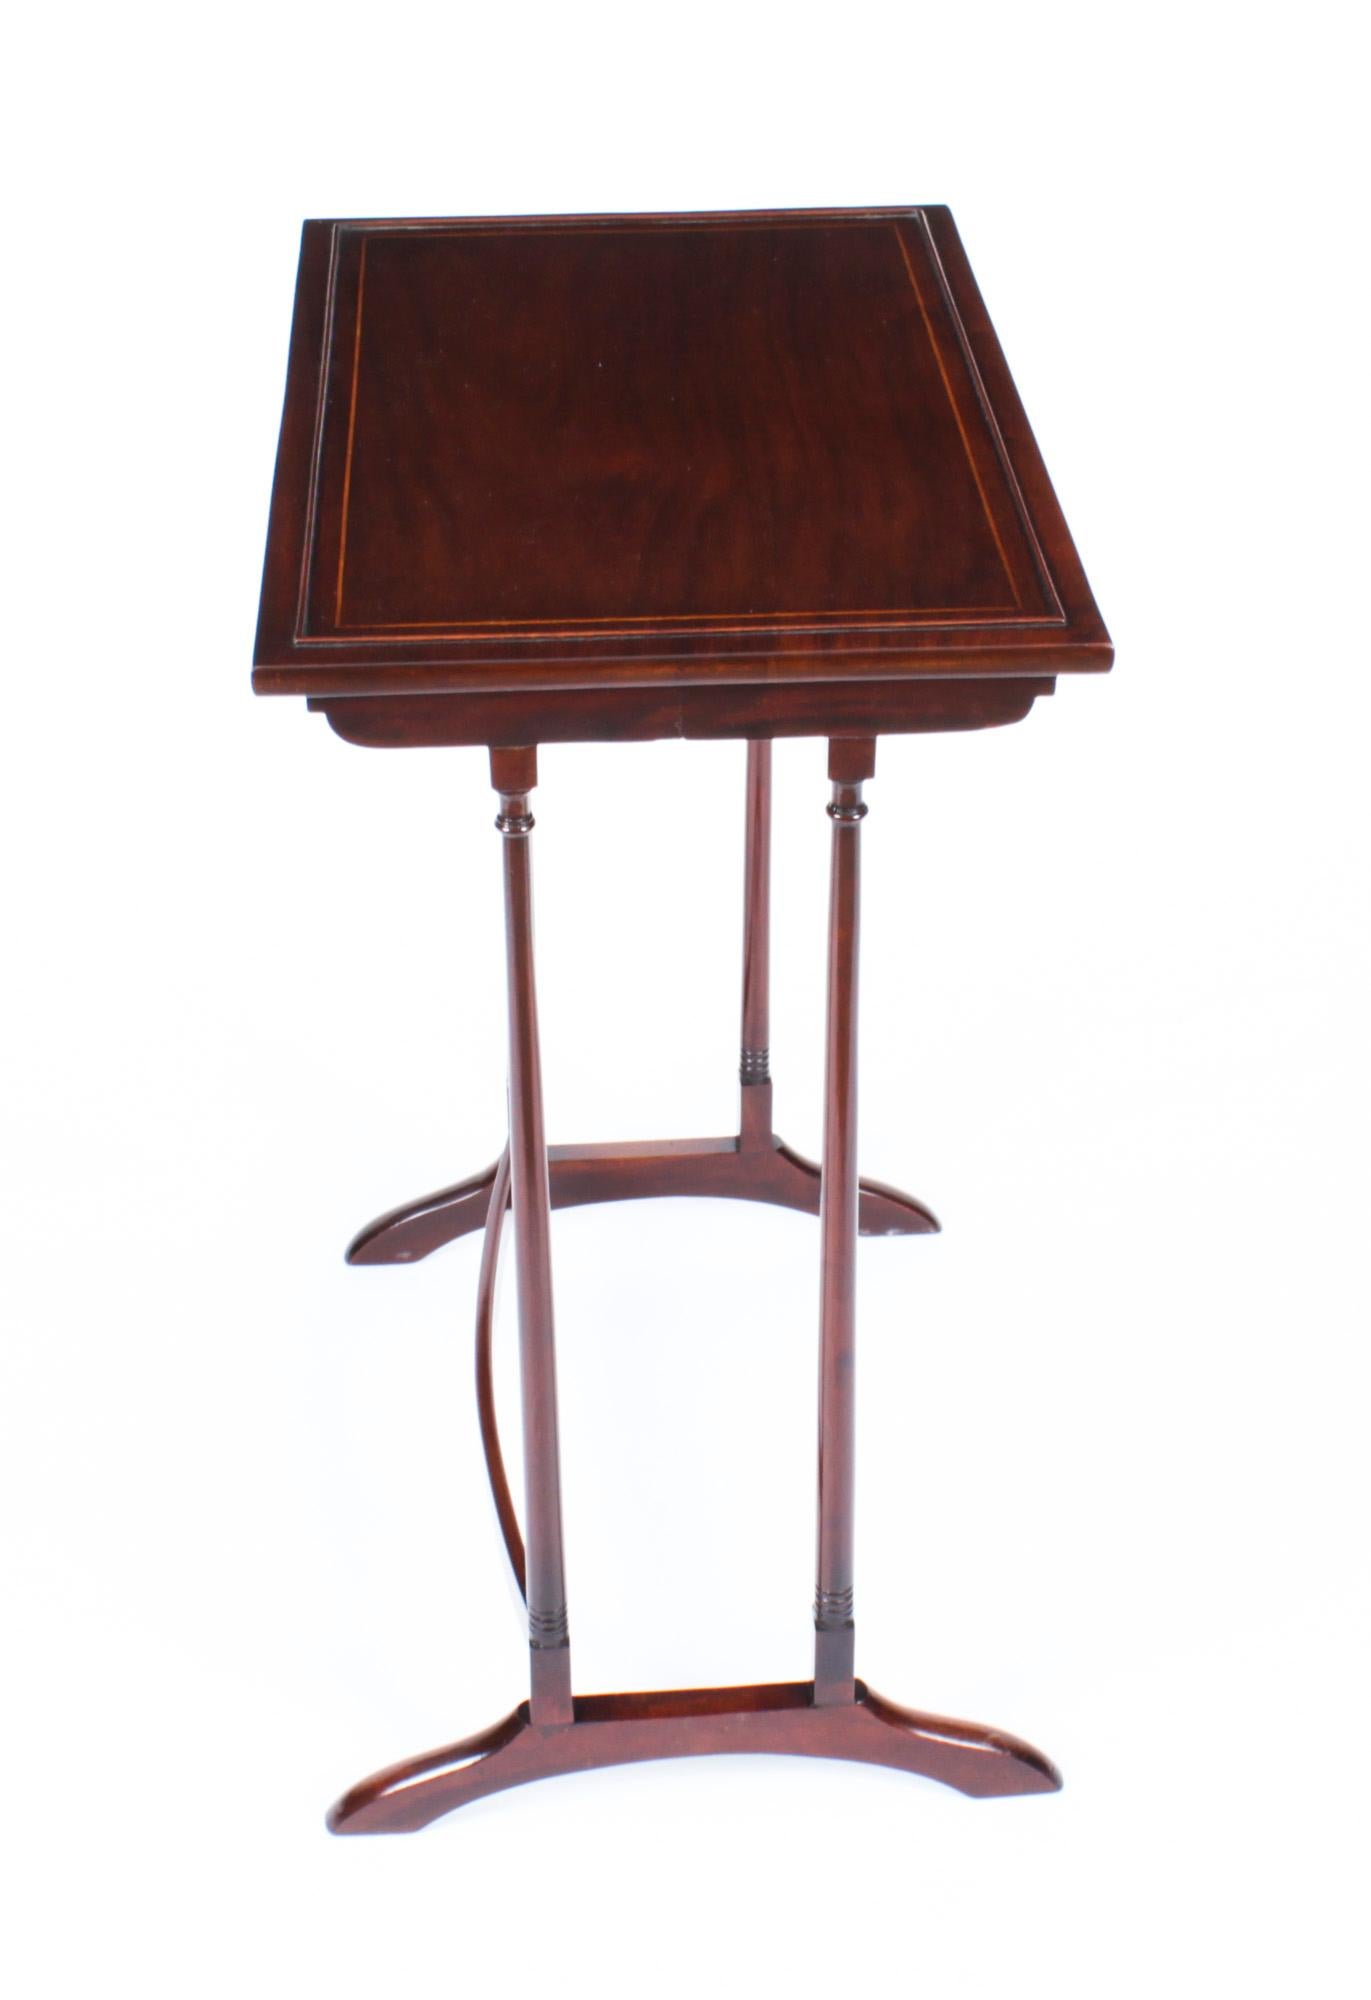 Antique Edwardian Mahogany Nest of Four Tables Early 20th Century For Sale 2